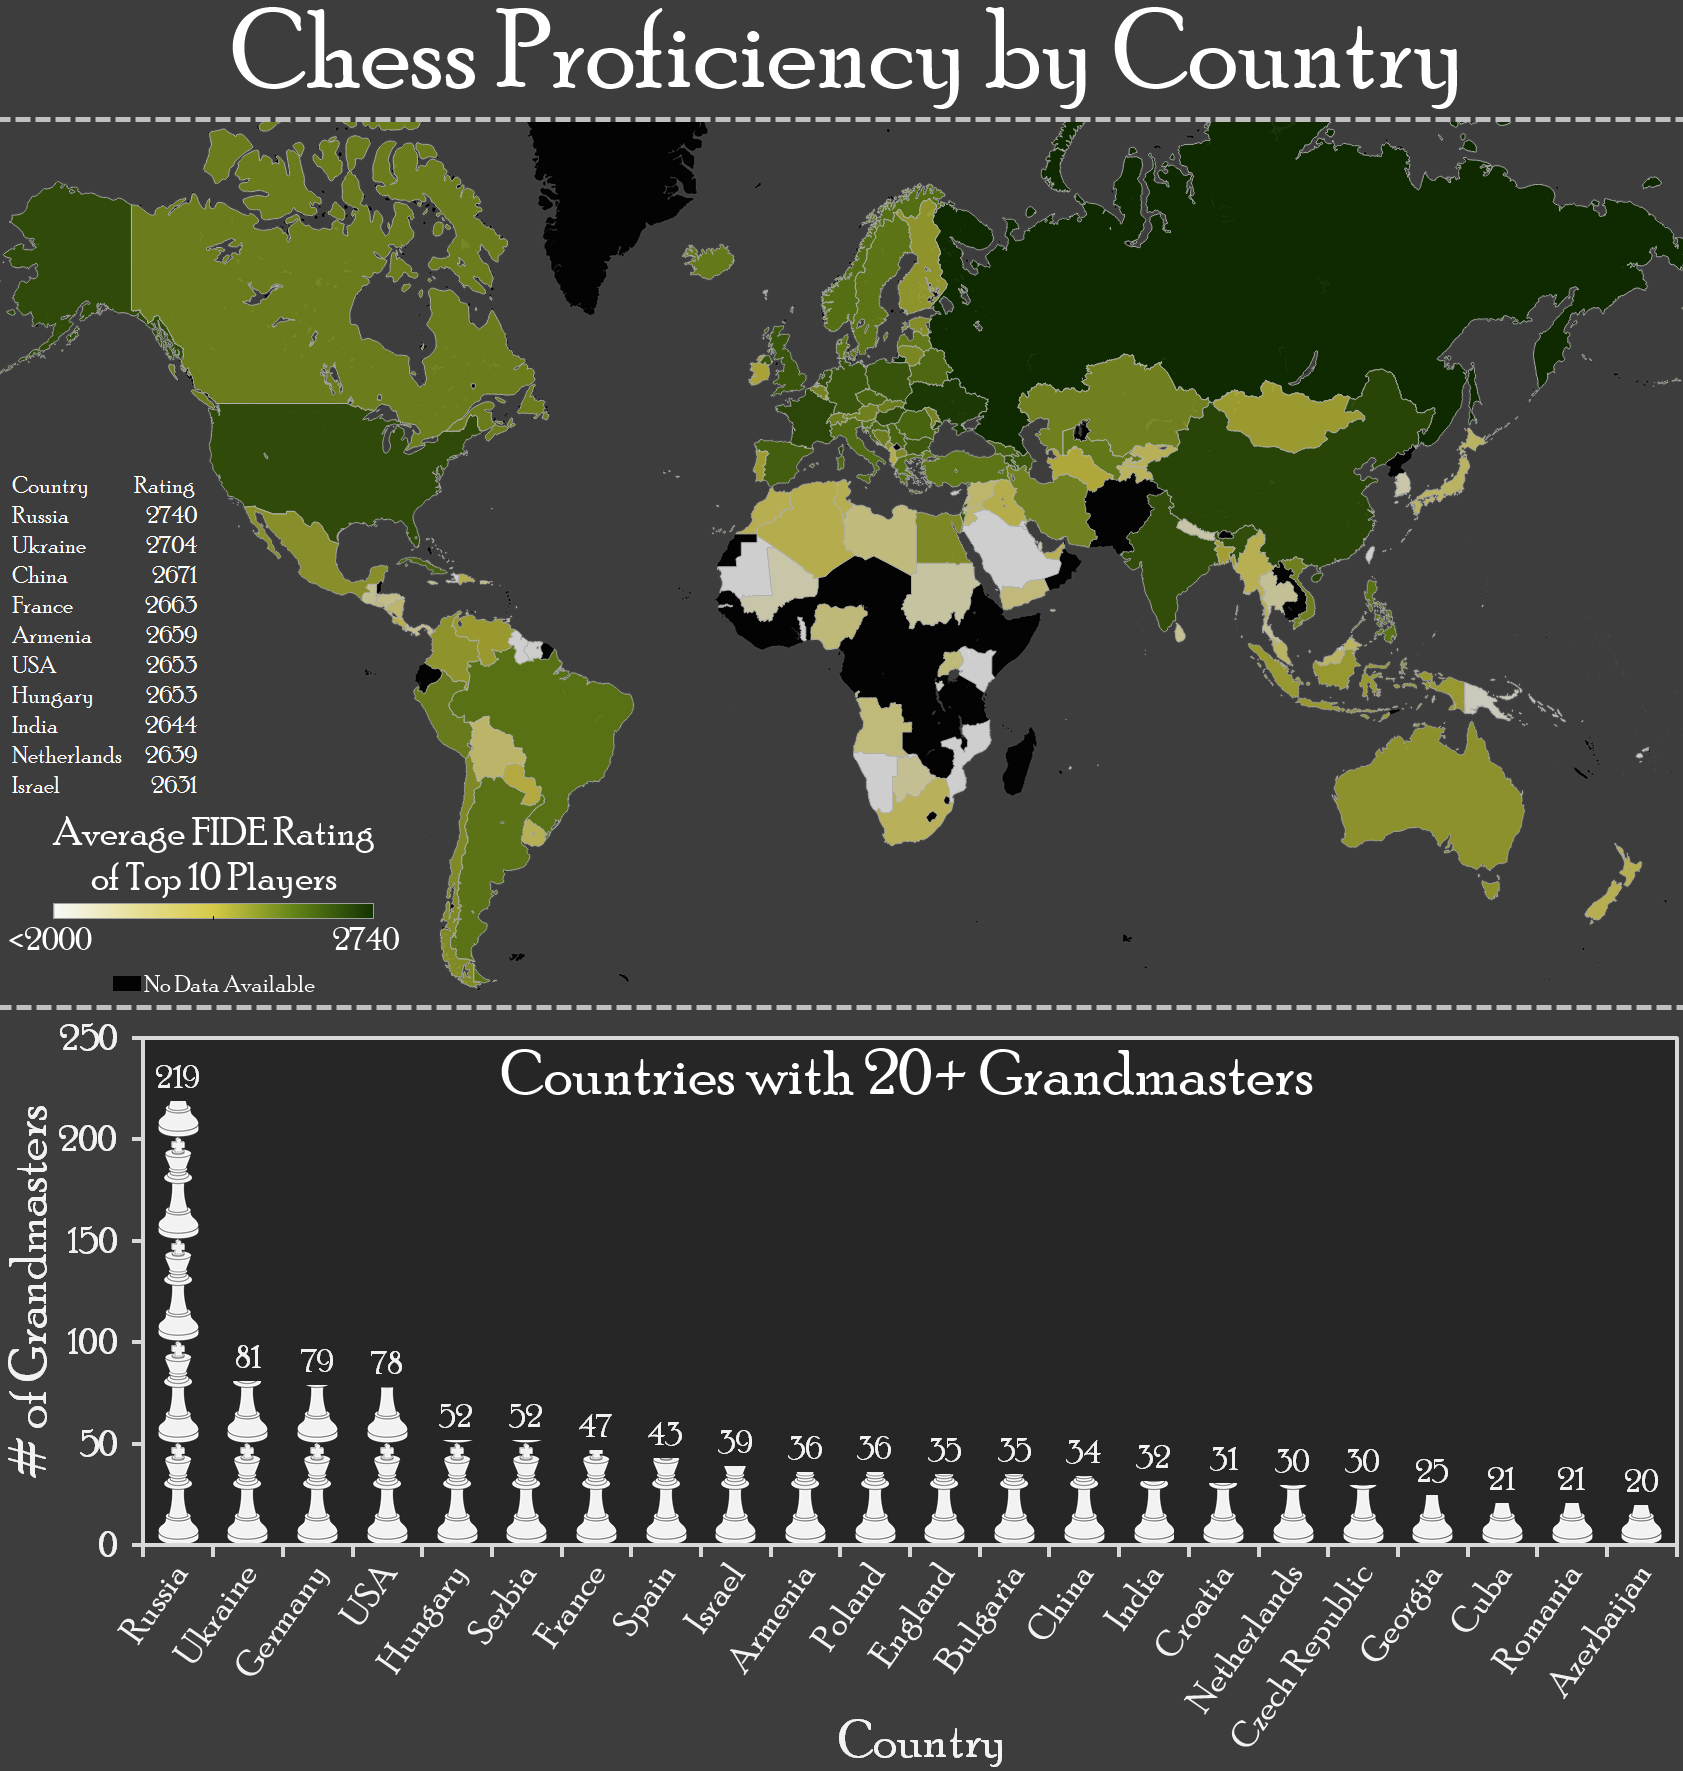 Total number of chess grandmasters per country in Europe. (Both active and  inactive) via ig @welcometo.europe : r/Maps